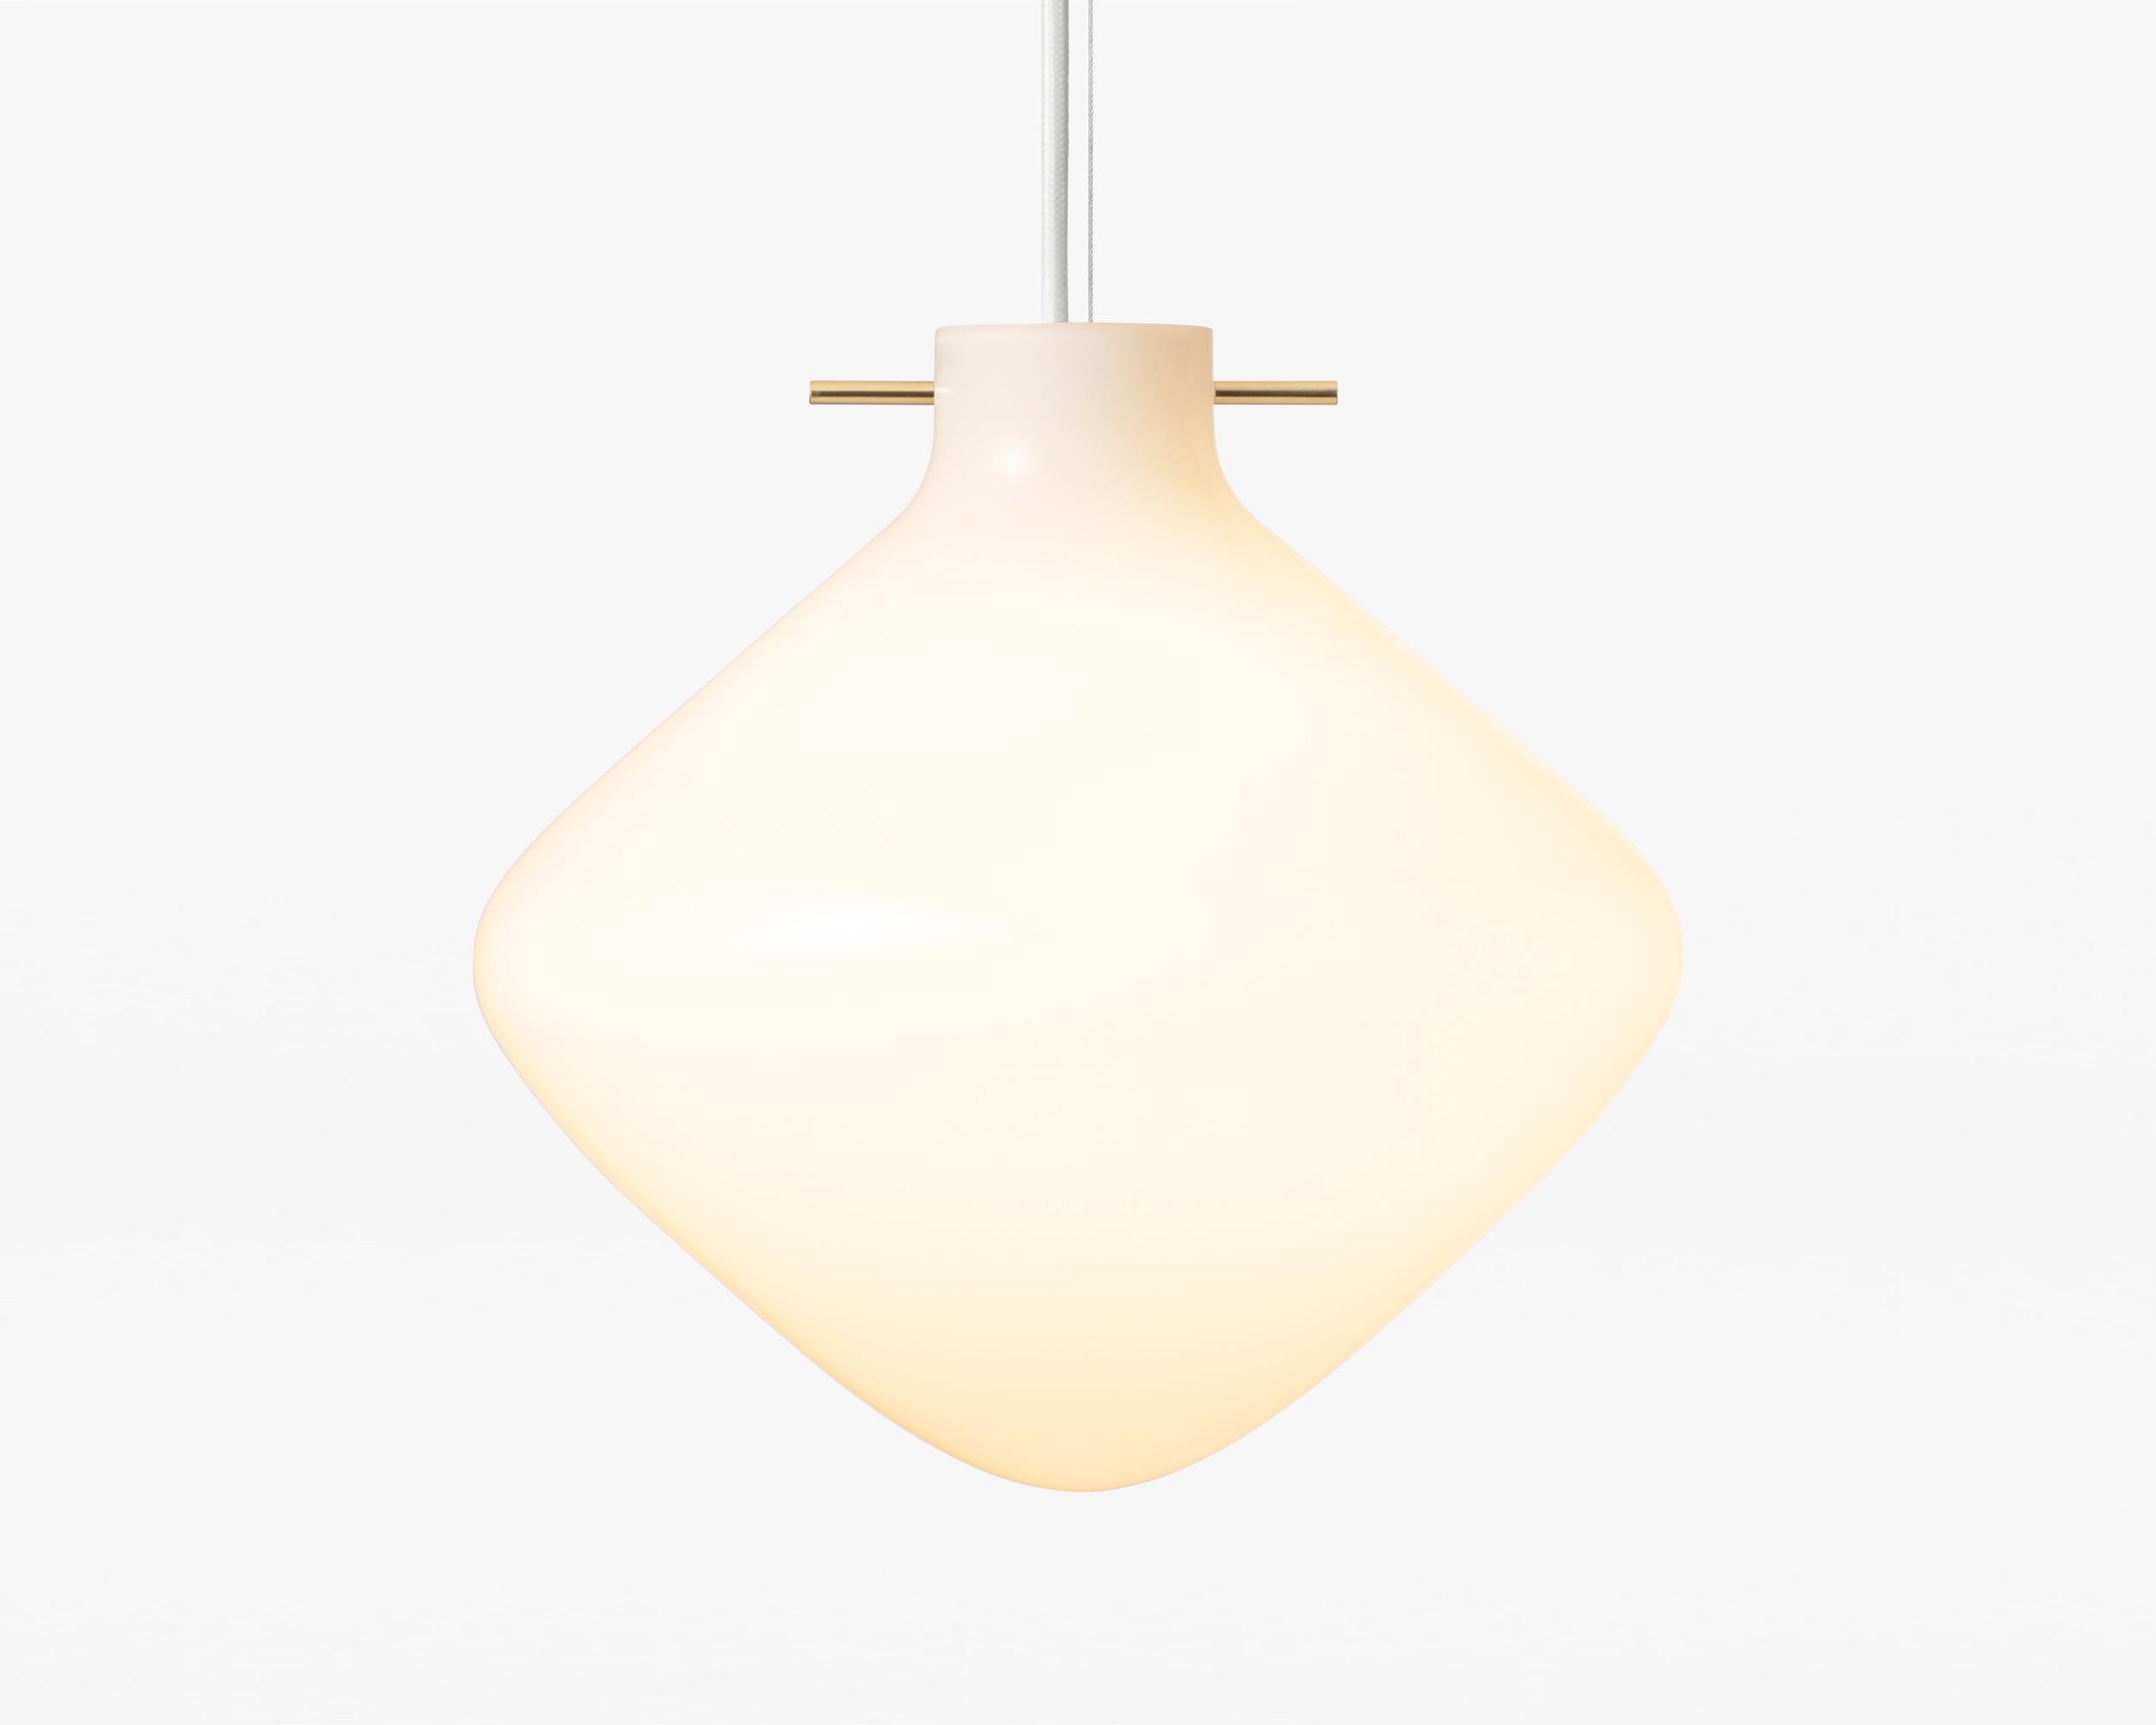 Pendant lamp repose / 260 BY Lyfa

Pendant lamp signed by GamFratesi for Lyfa

Measures: D 260 mm H 252 mm
Opal glass / black steel or brass

Textile wire (black or white) 300cm
Light source: E14 max 60W (110V-230V)

-- 
Repose is a new